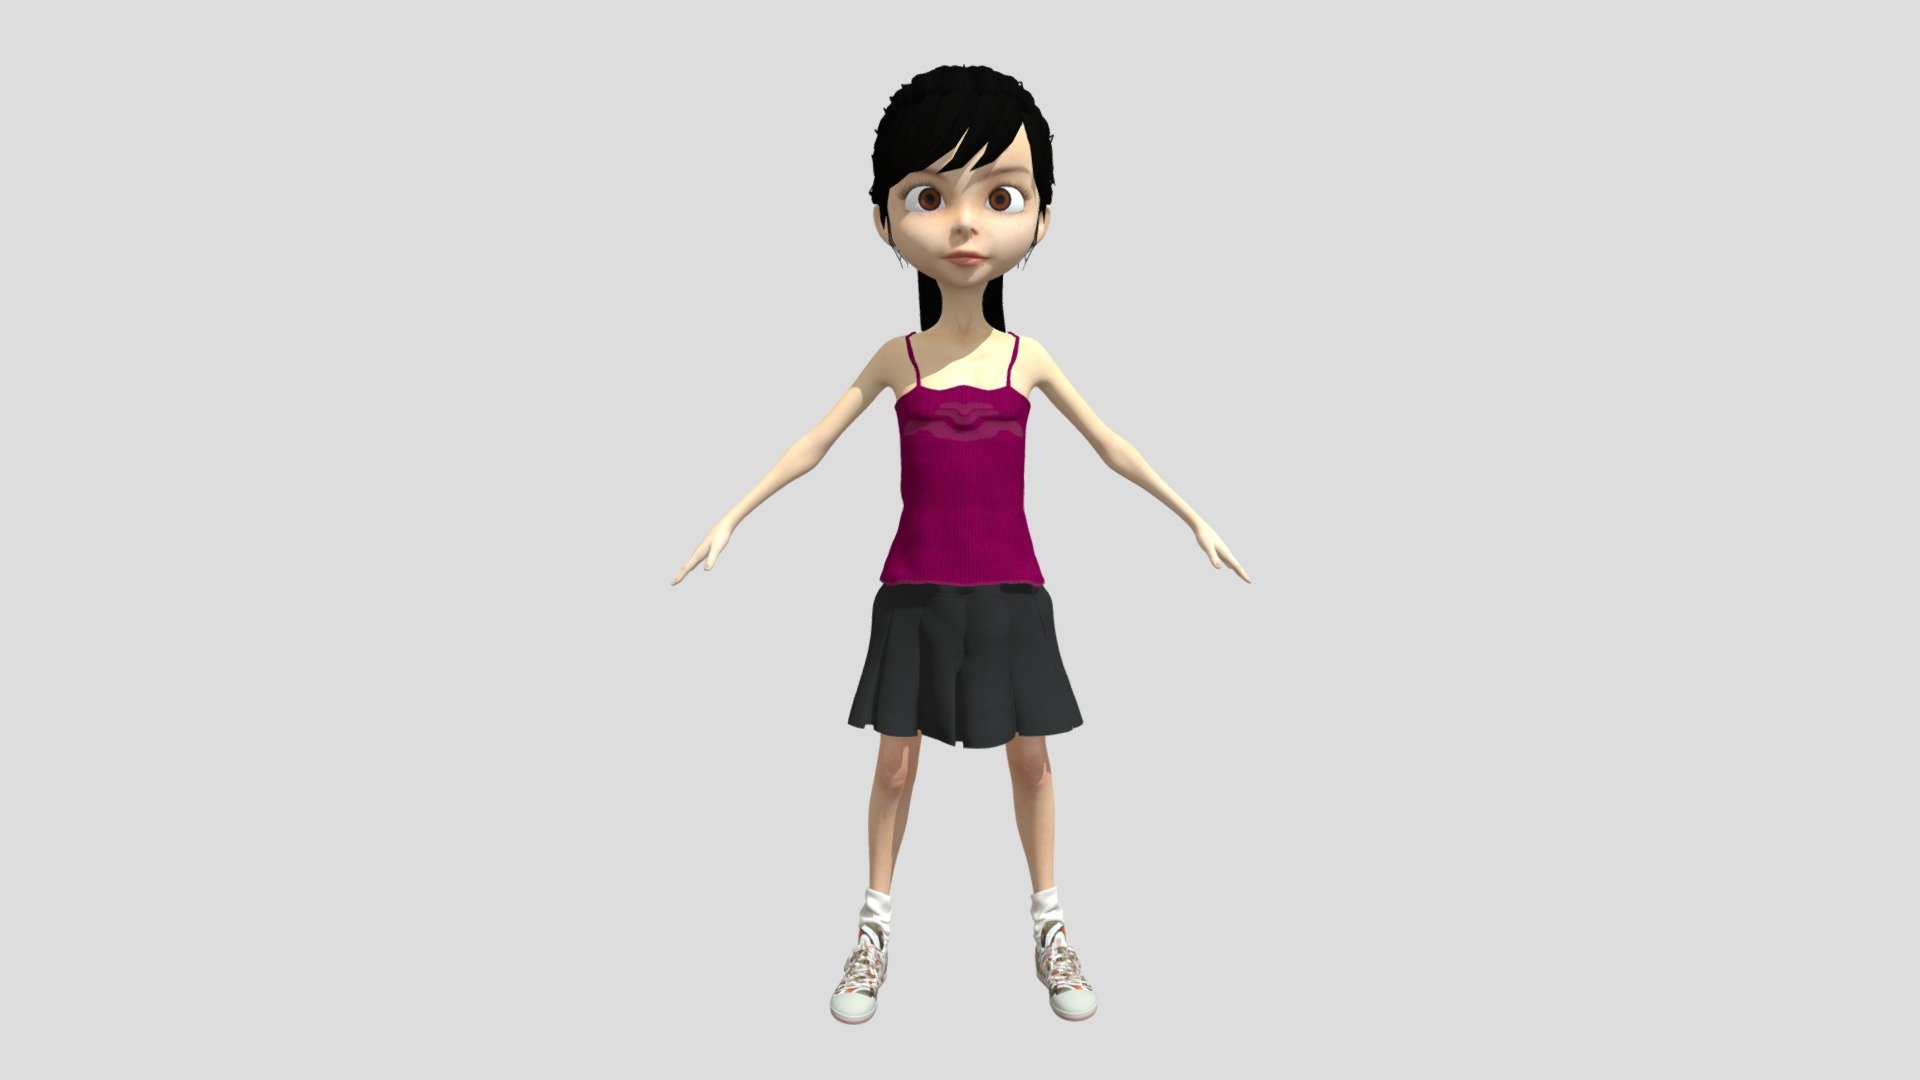 Toon Girl 3D model is a high quality, photo real model that will enhance detail and realism to any of your game projects or commercials. The model has a fully textured, detailed design that allows for close-up renders 3d model